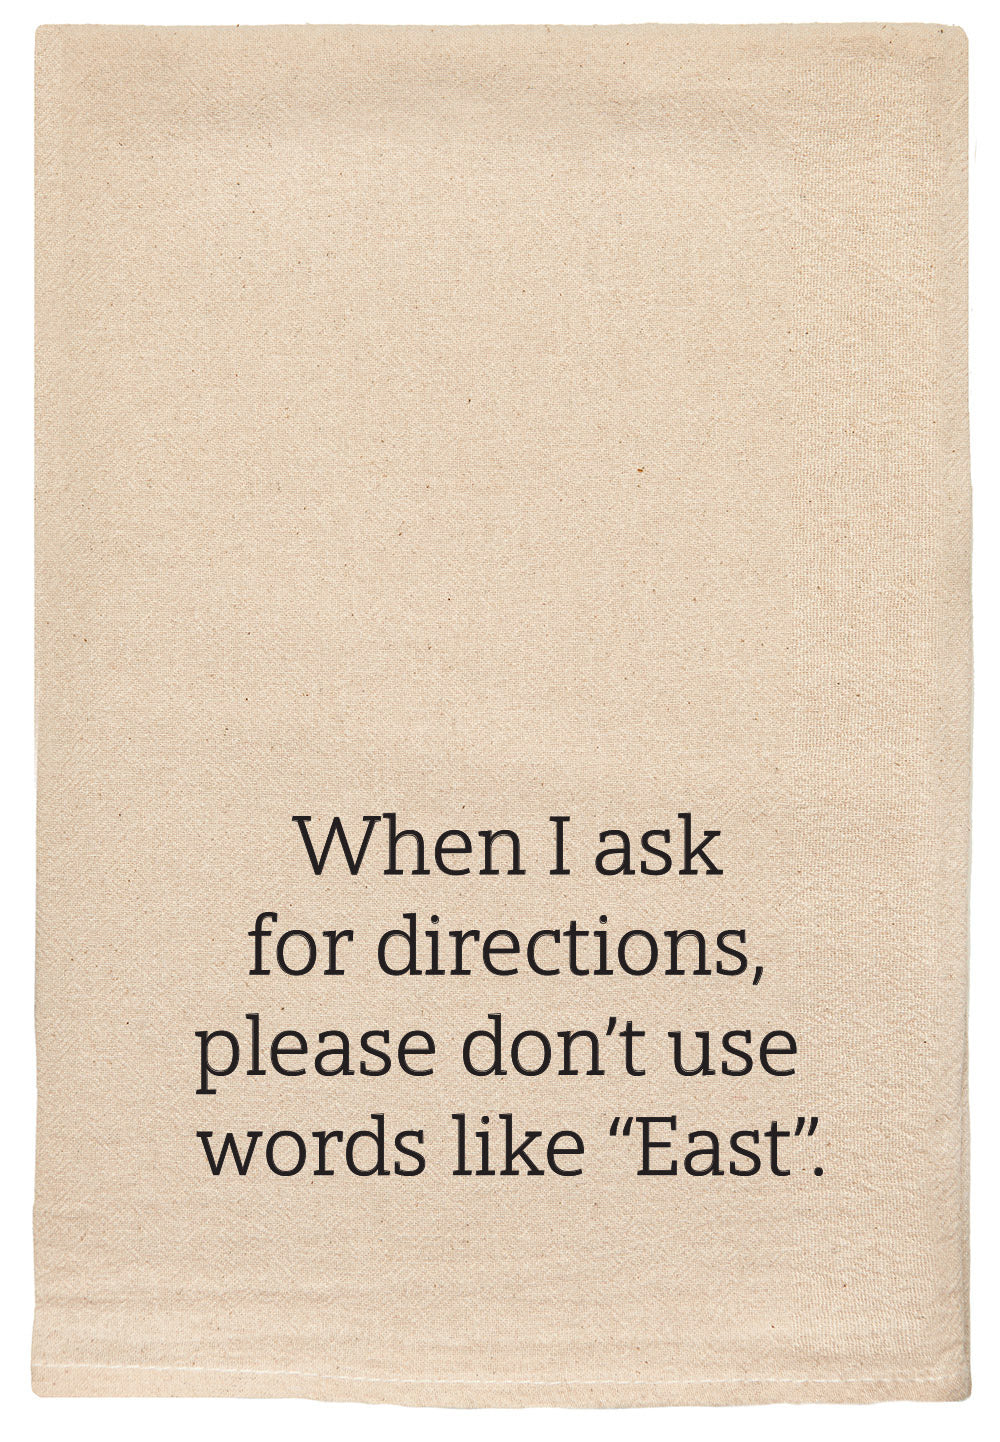 When I ask for directions, please don't use words like "East".